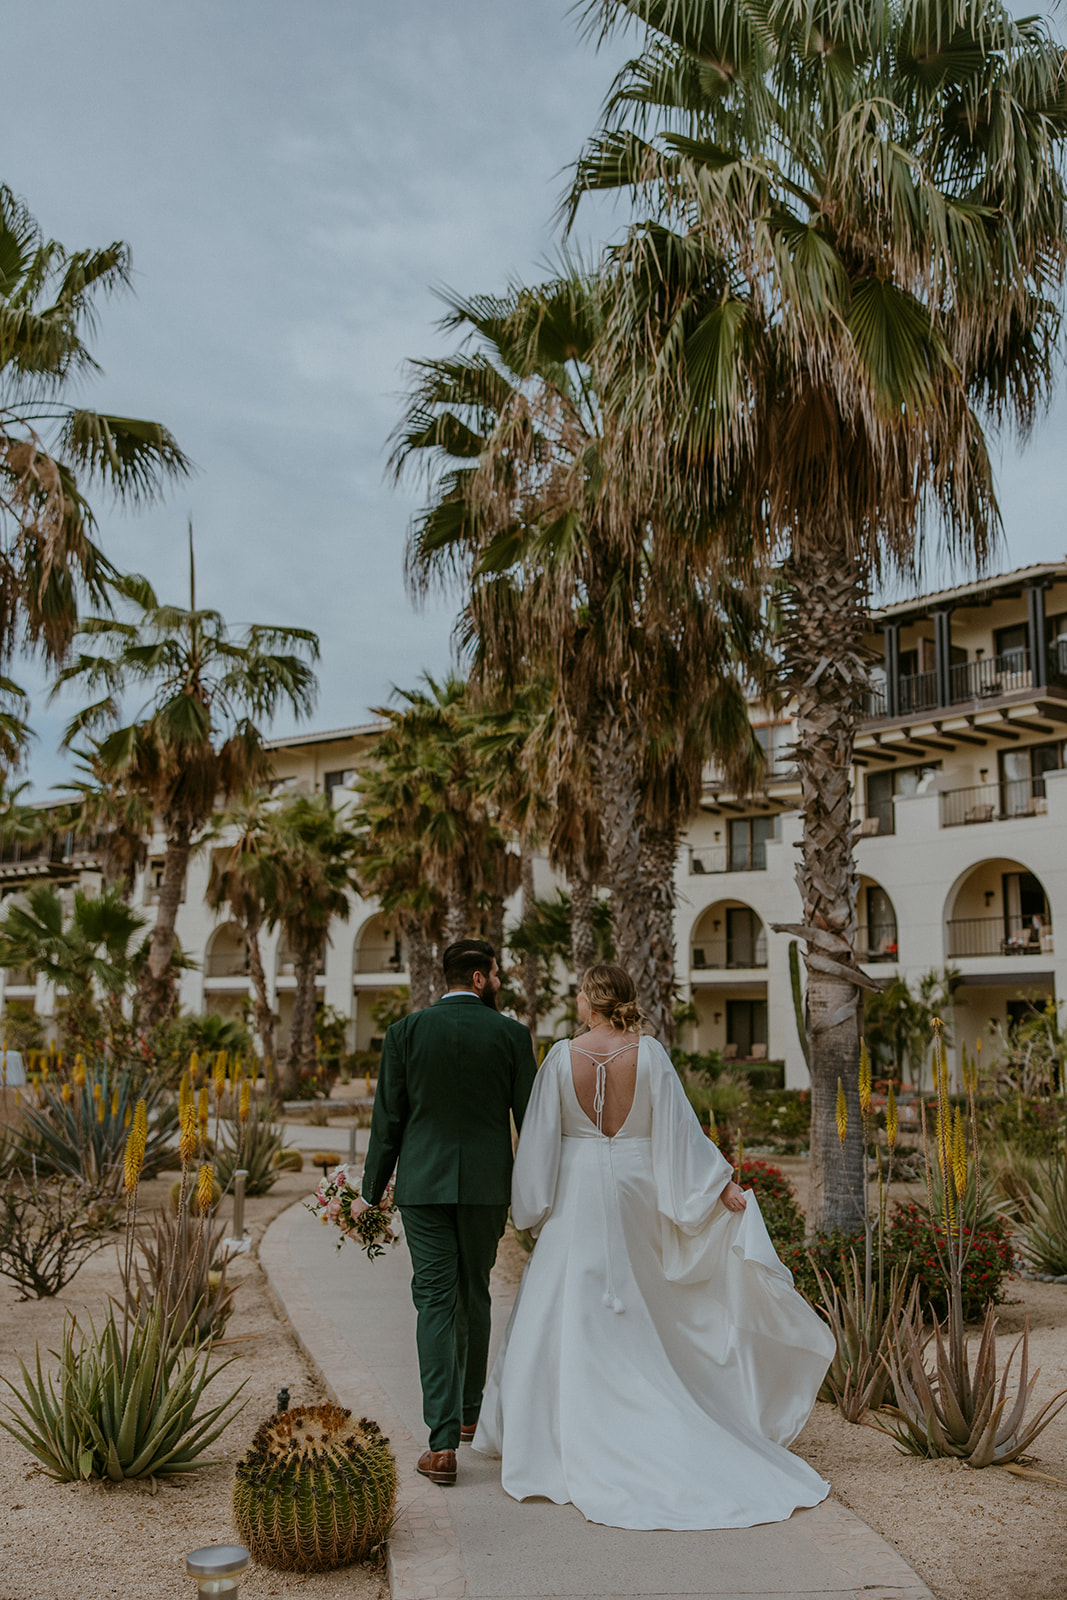 This bride and groom chose Mexico for their resort wedding.